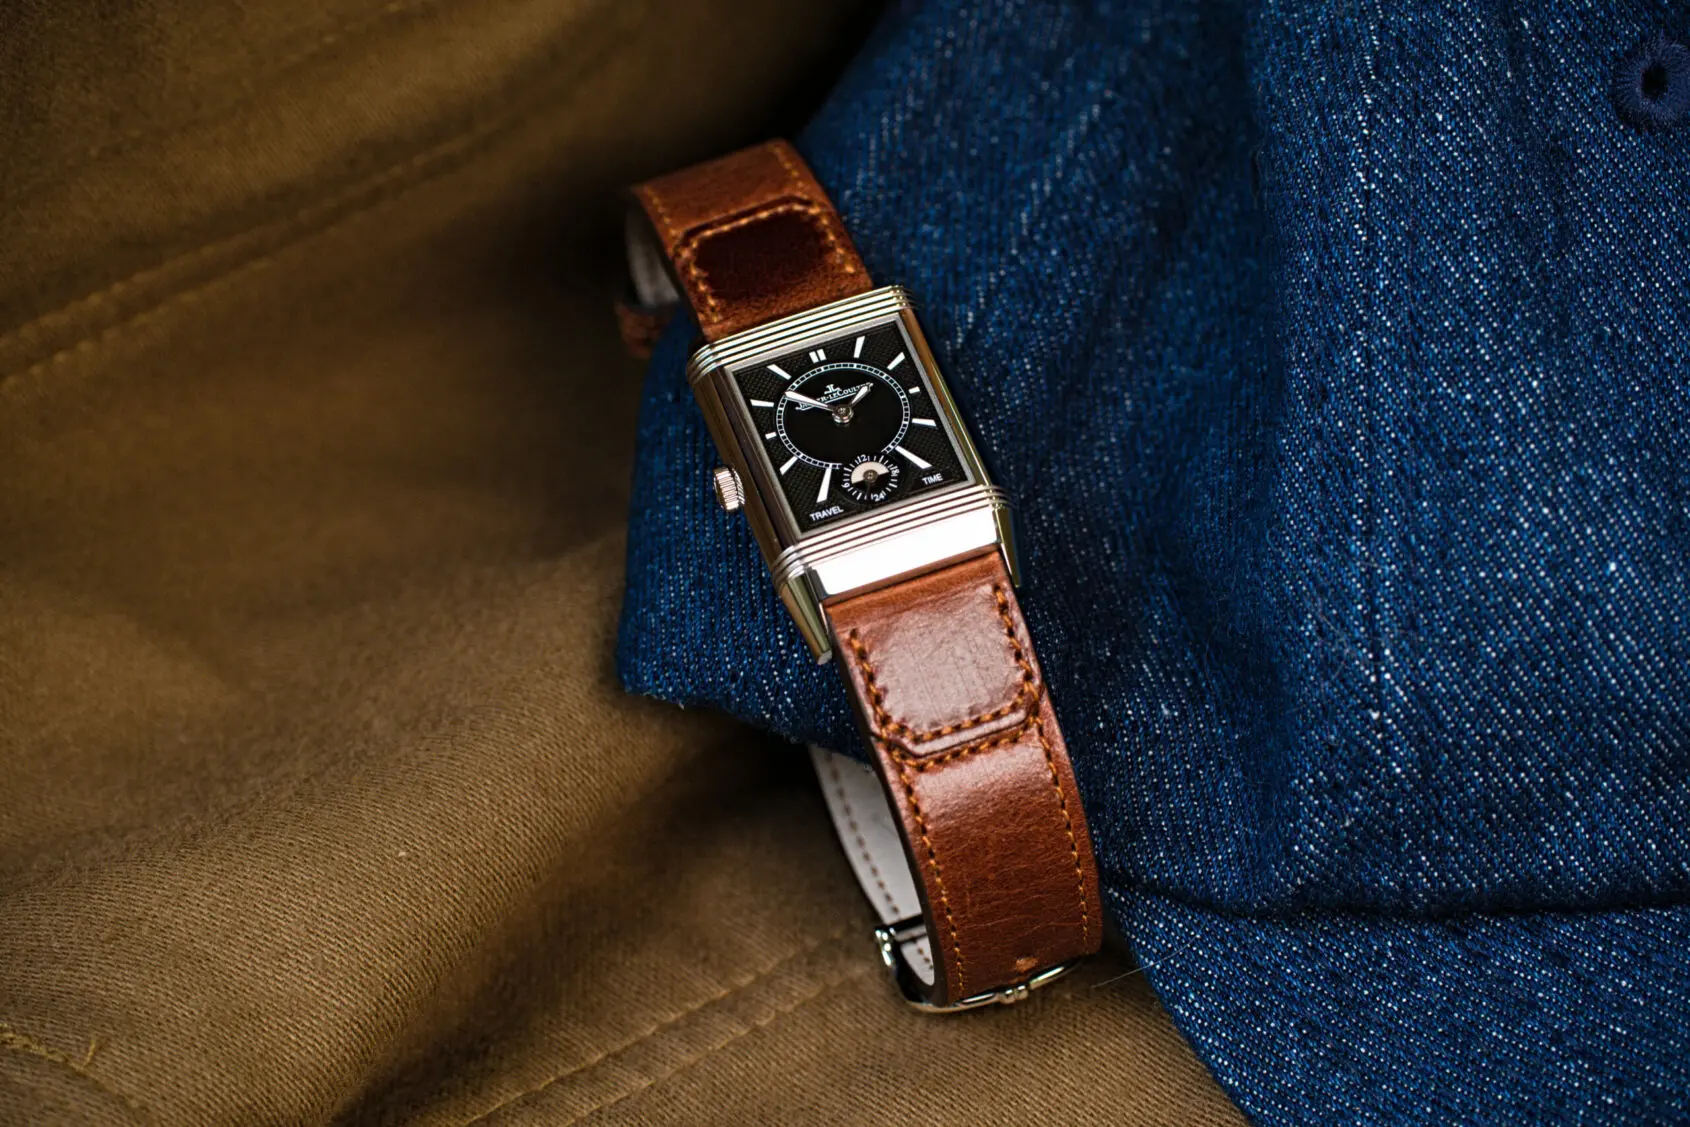 Dressing down a Reverso is easier than you'd think